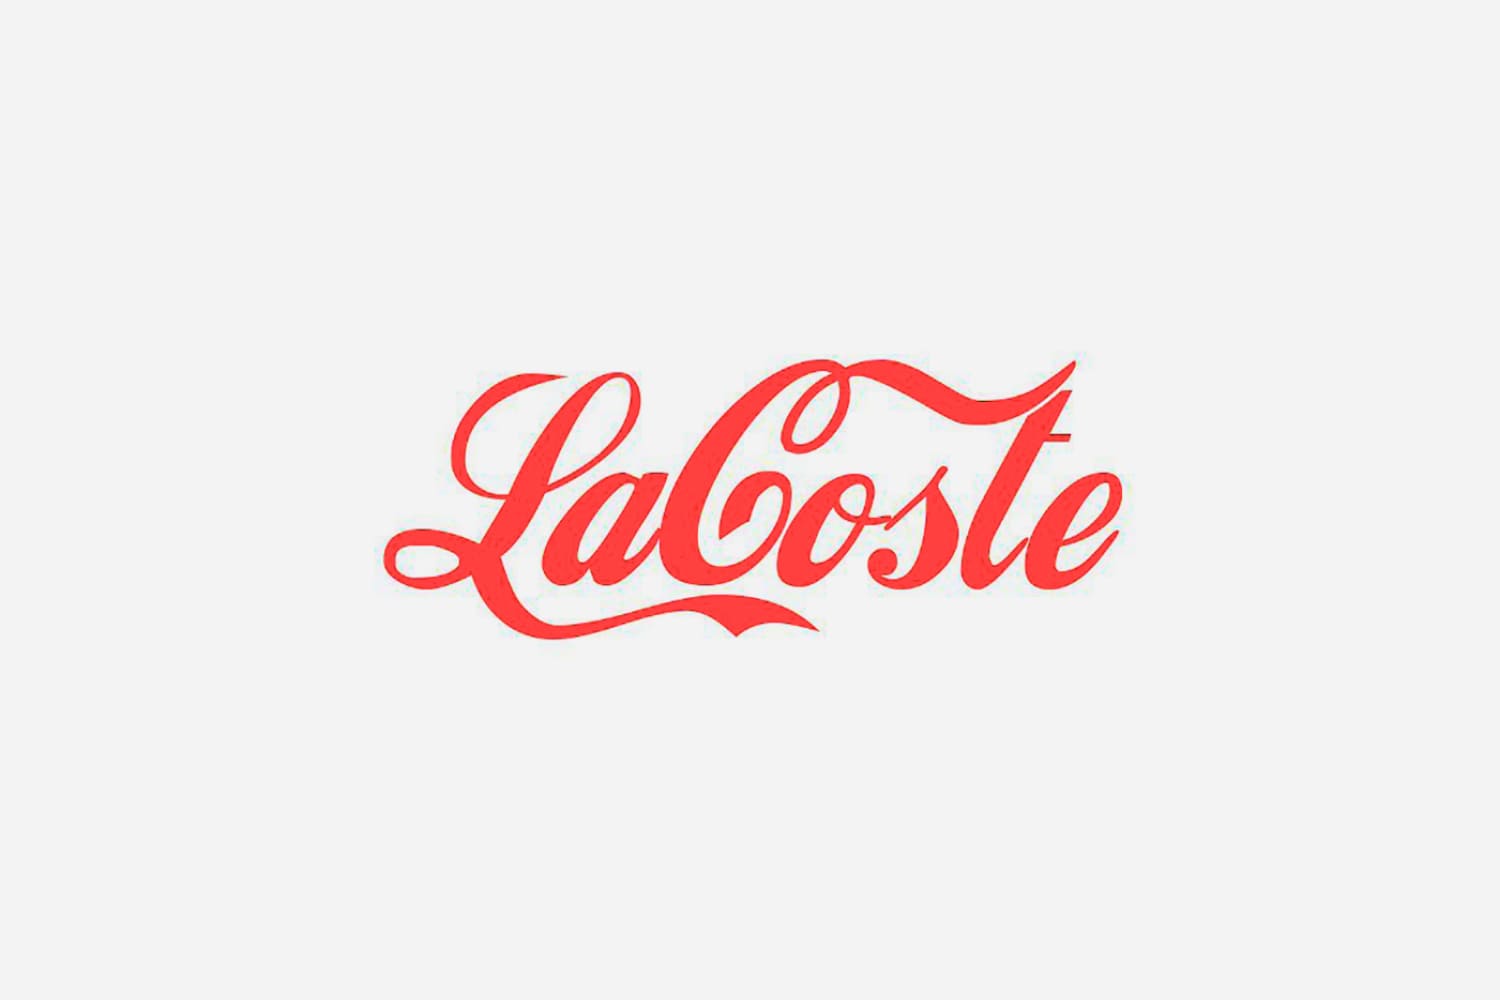 The word Lacoste written in the style of the Coca-Cola logo.